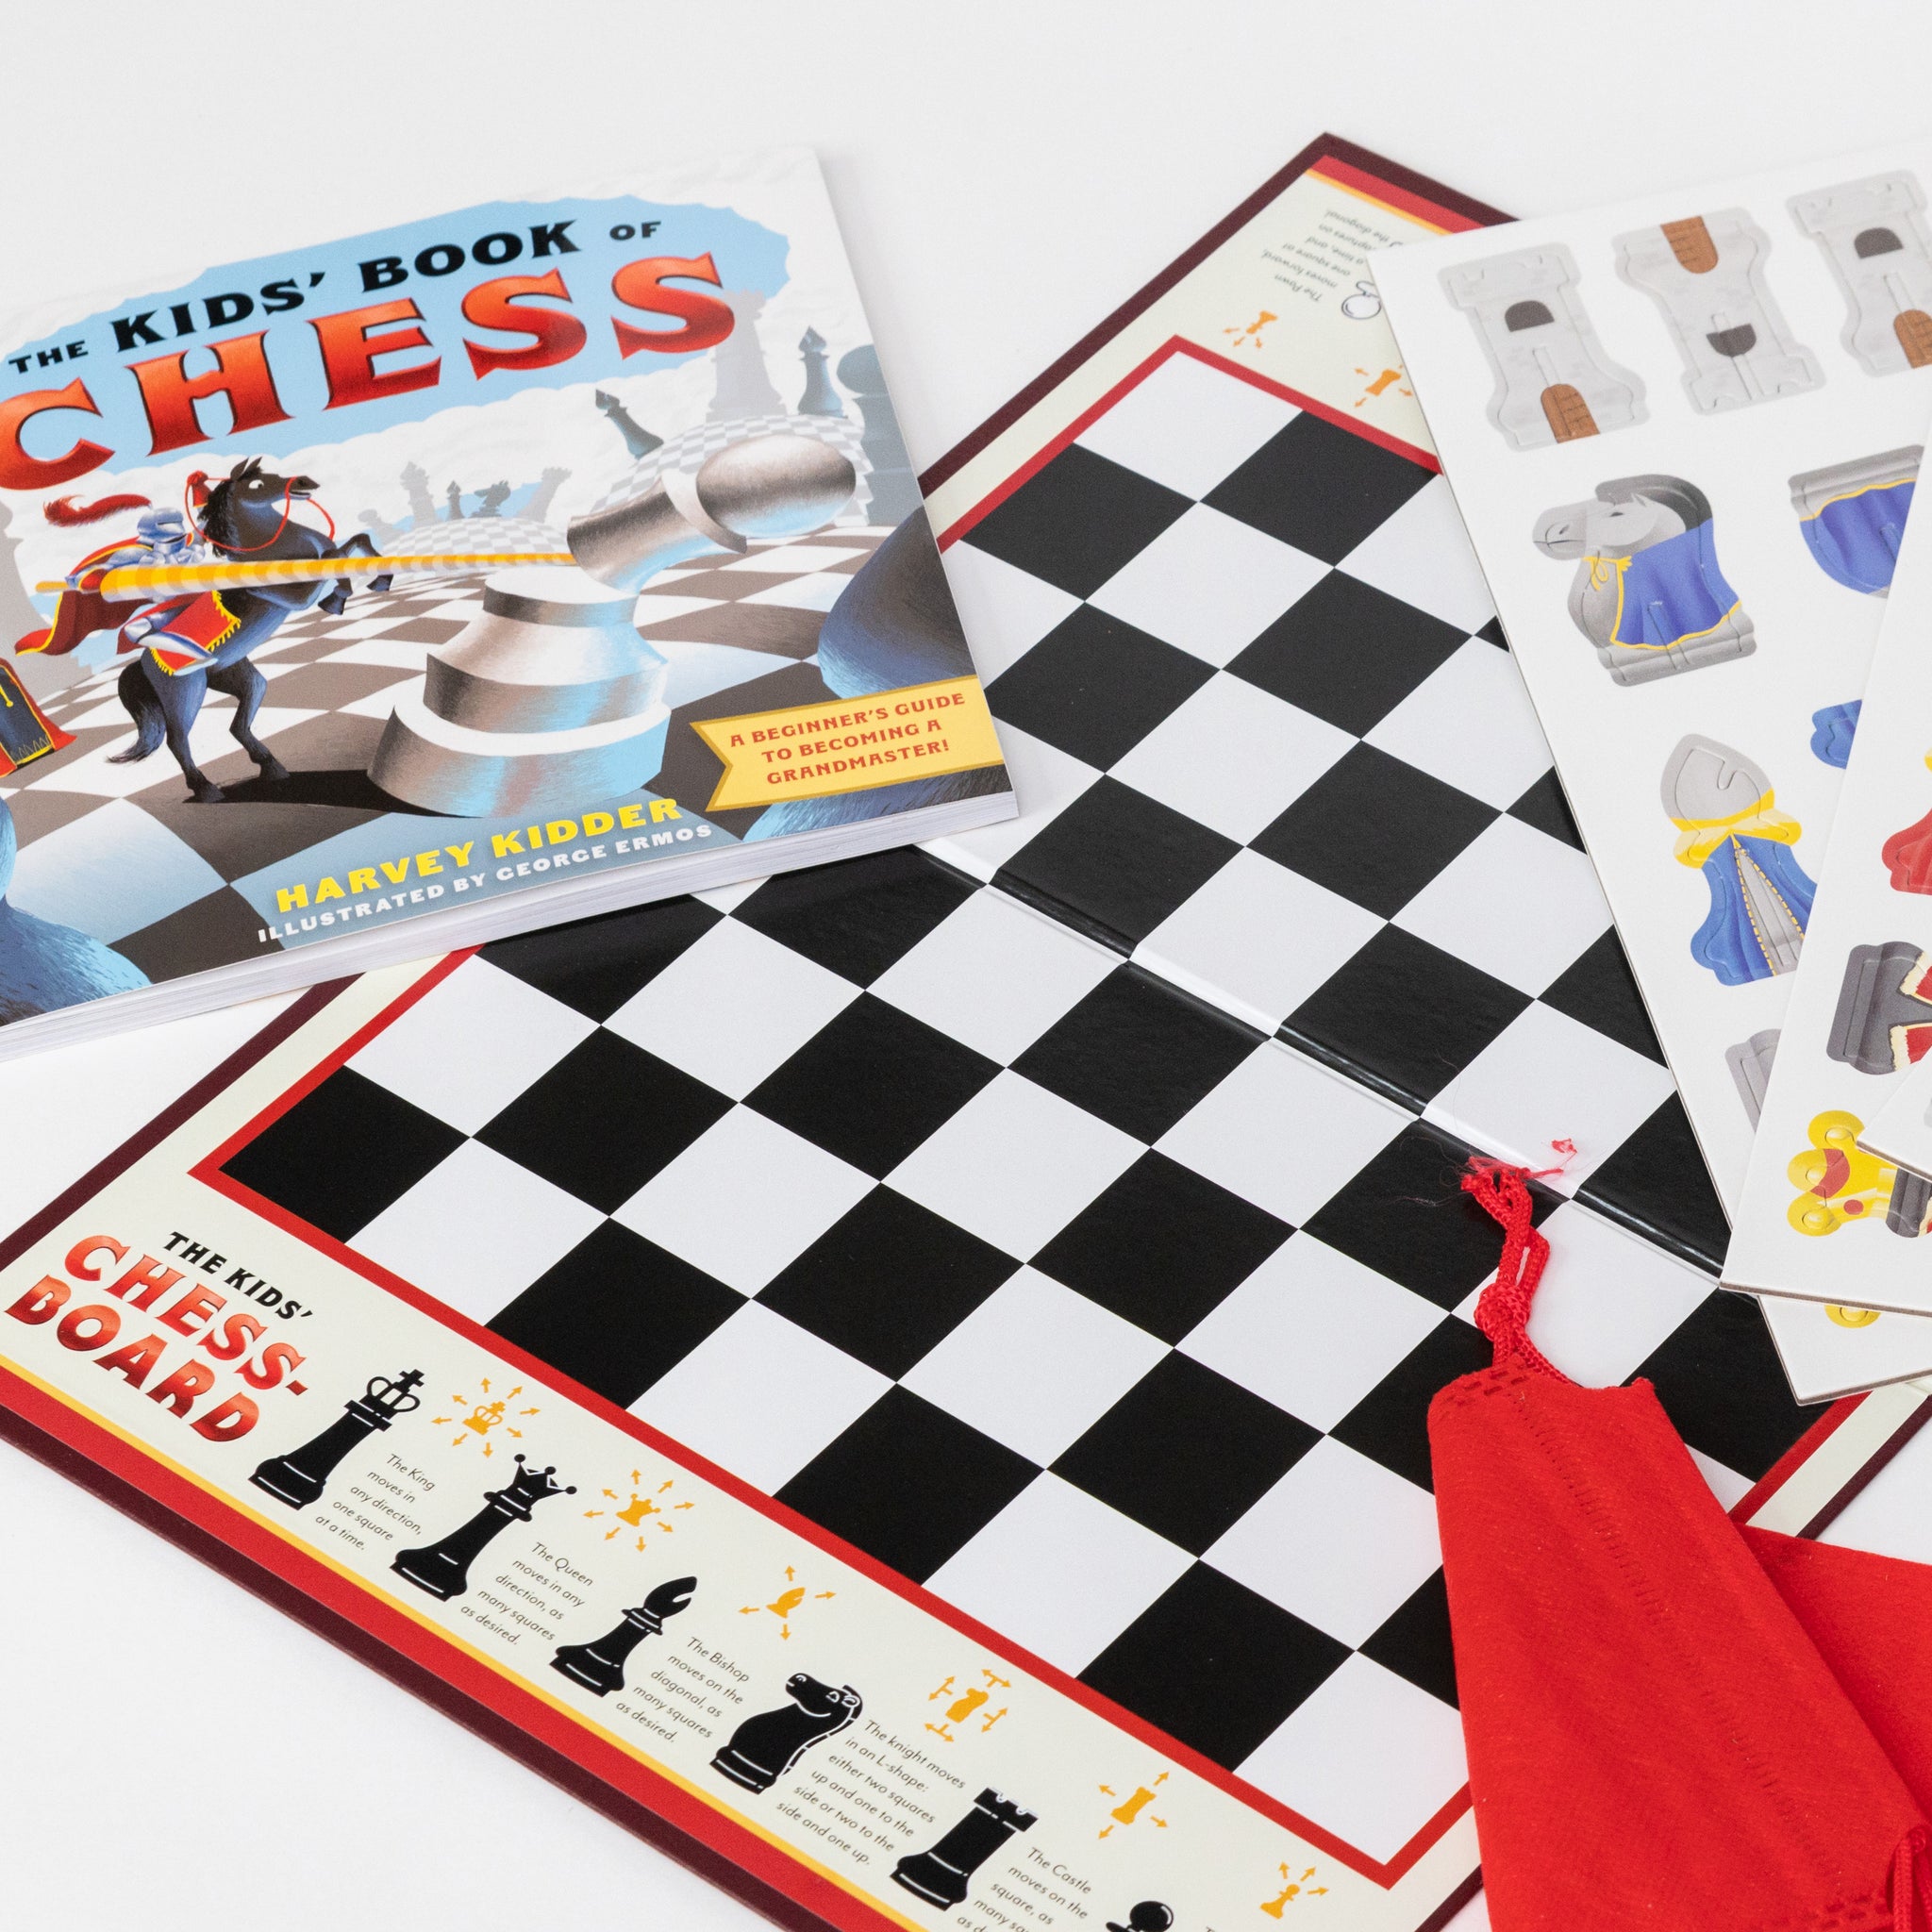 Chess moves: how many are there?, Board games